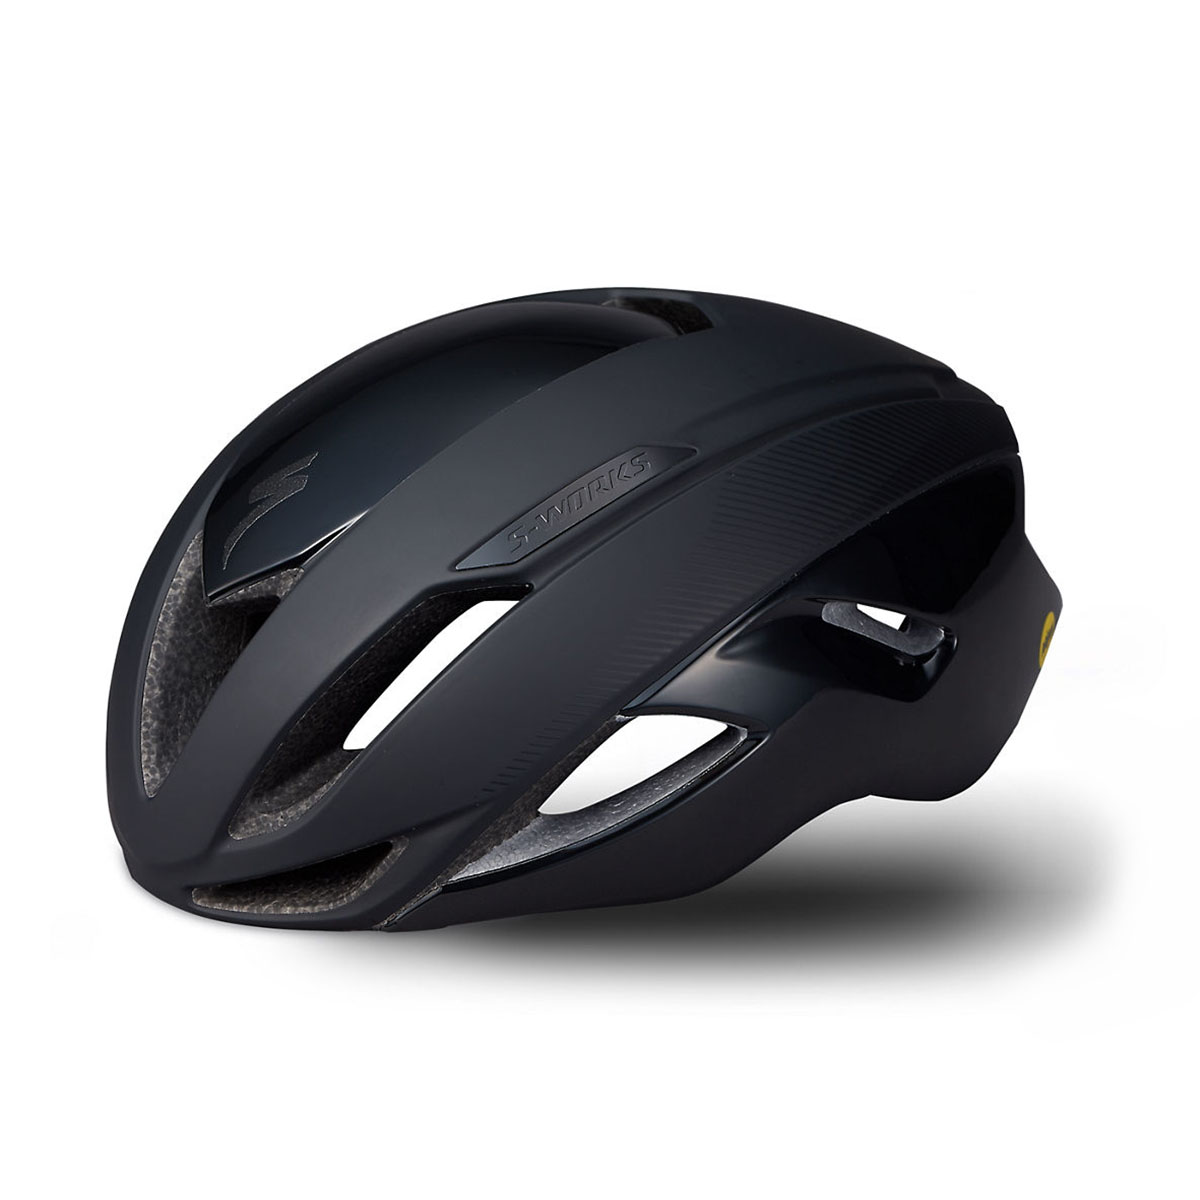 CASQUE SPECIALIZED S-WORKS EVADE II MIPS NOIR LARGE